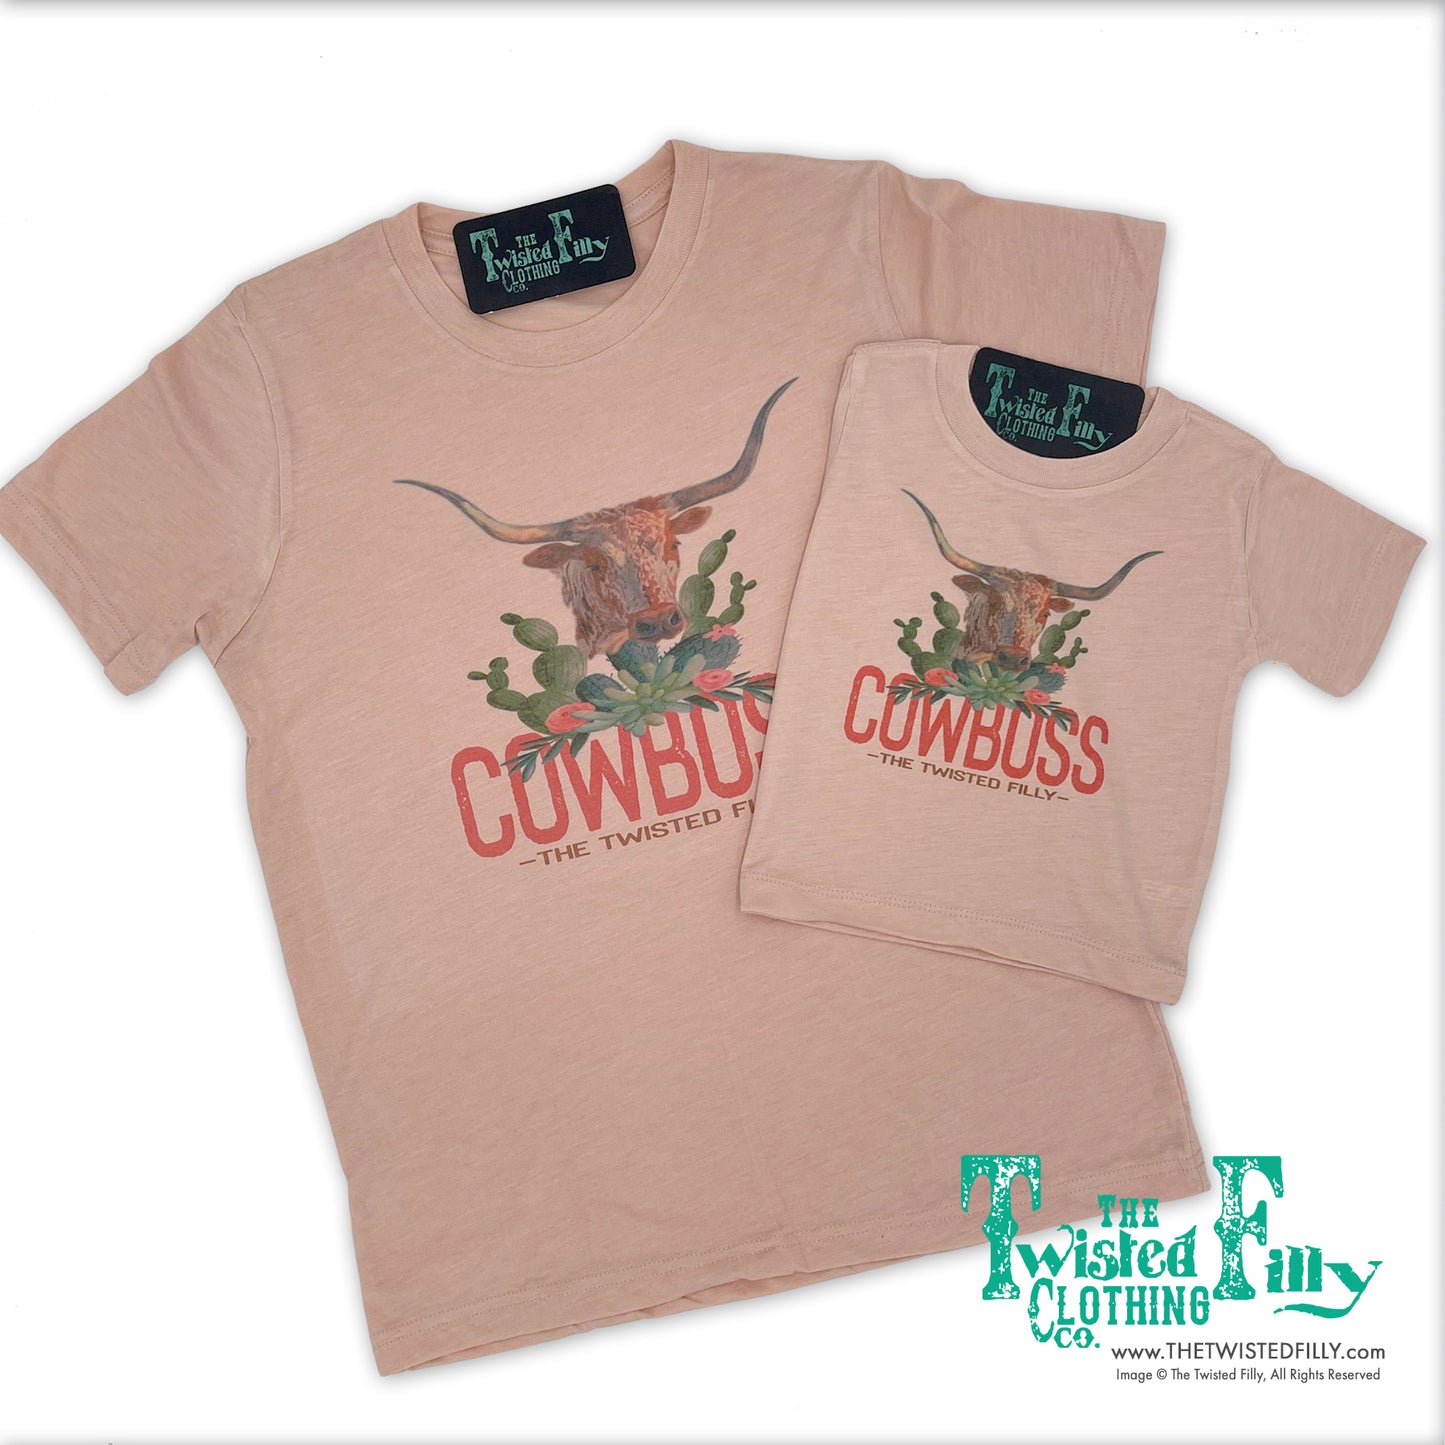 Cowboss - S/S Youth Tee - Dusty Rose